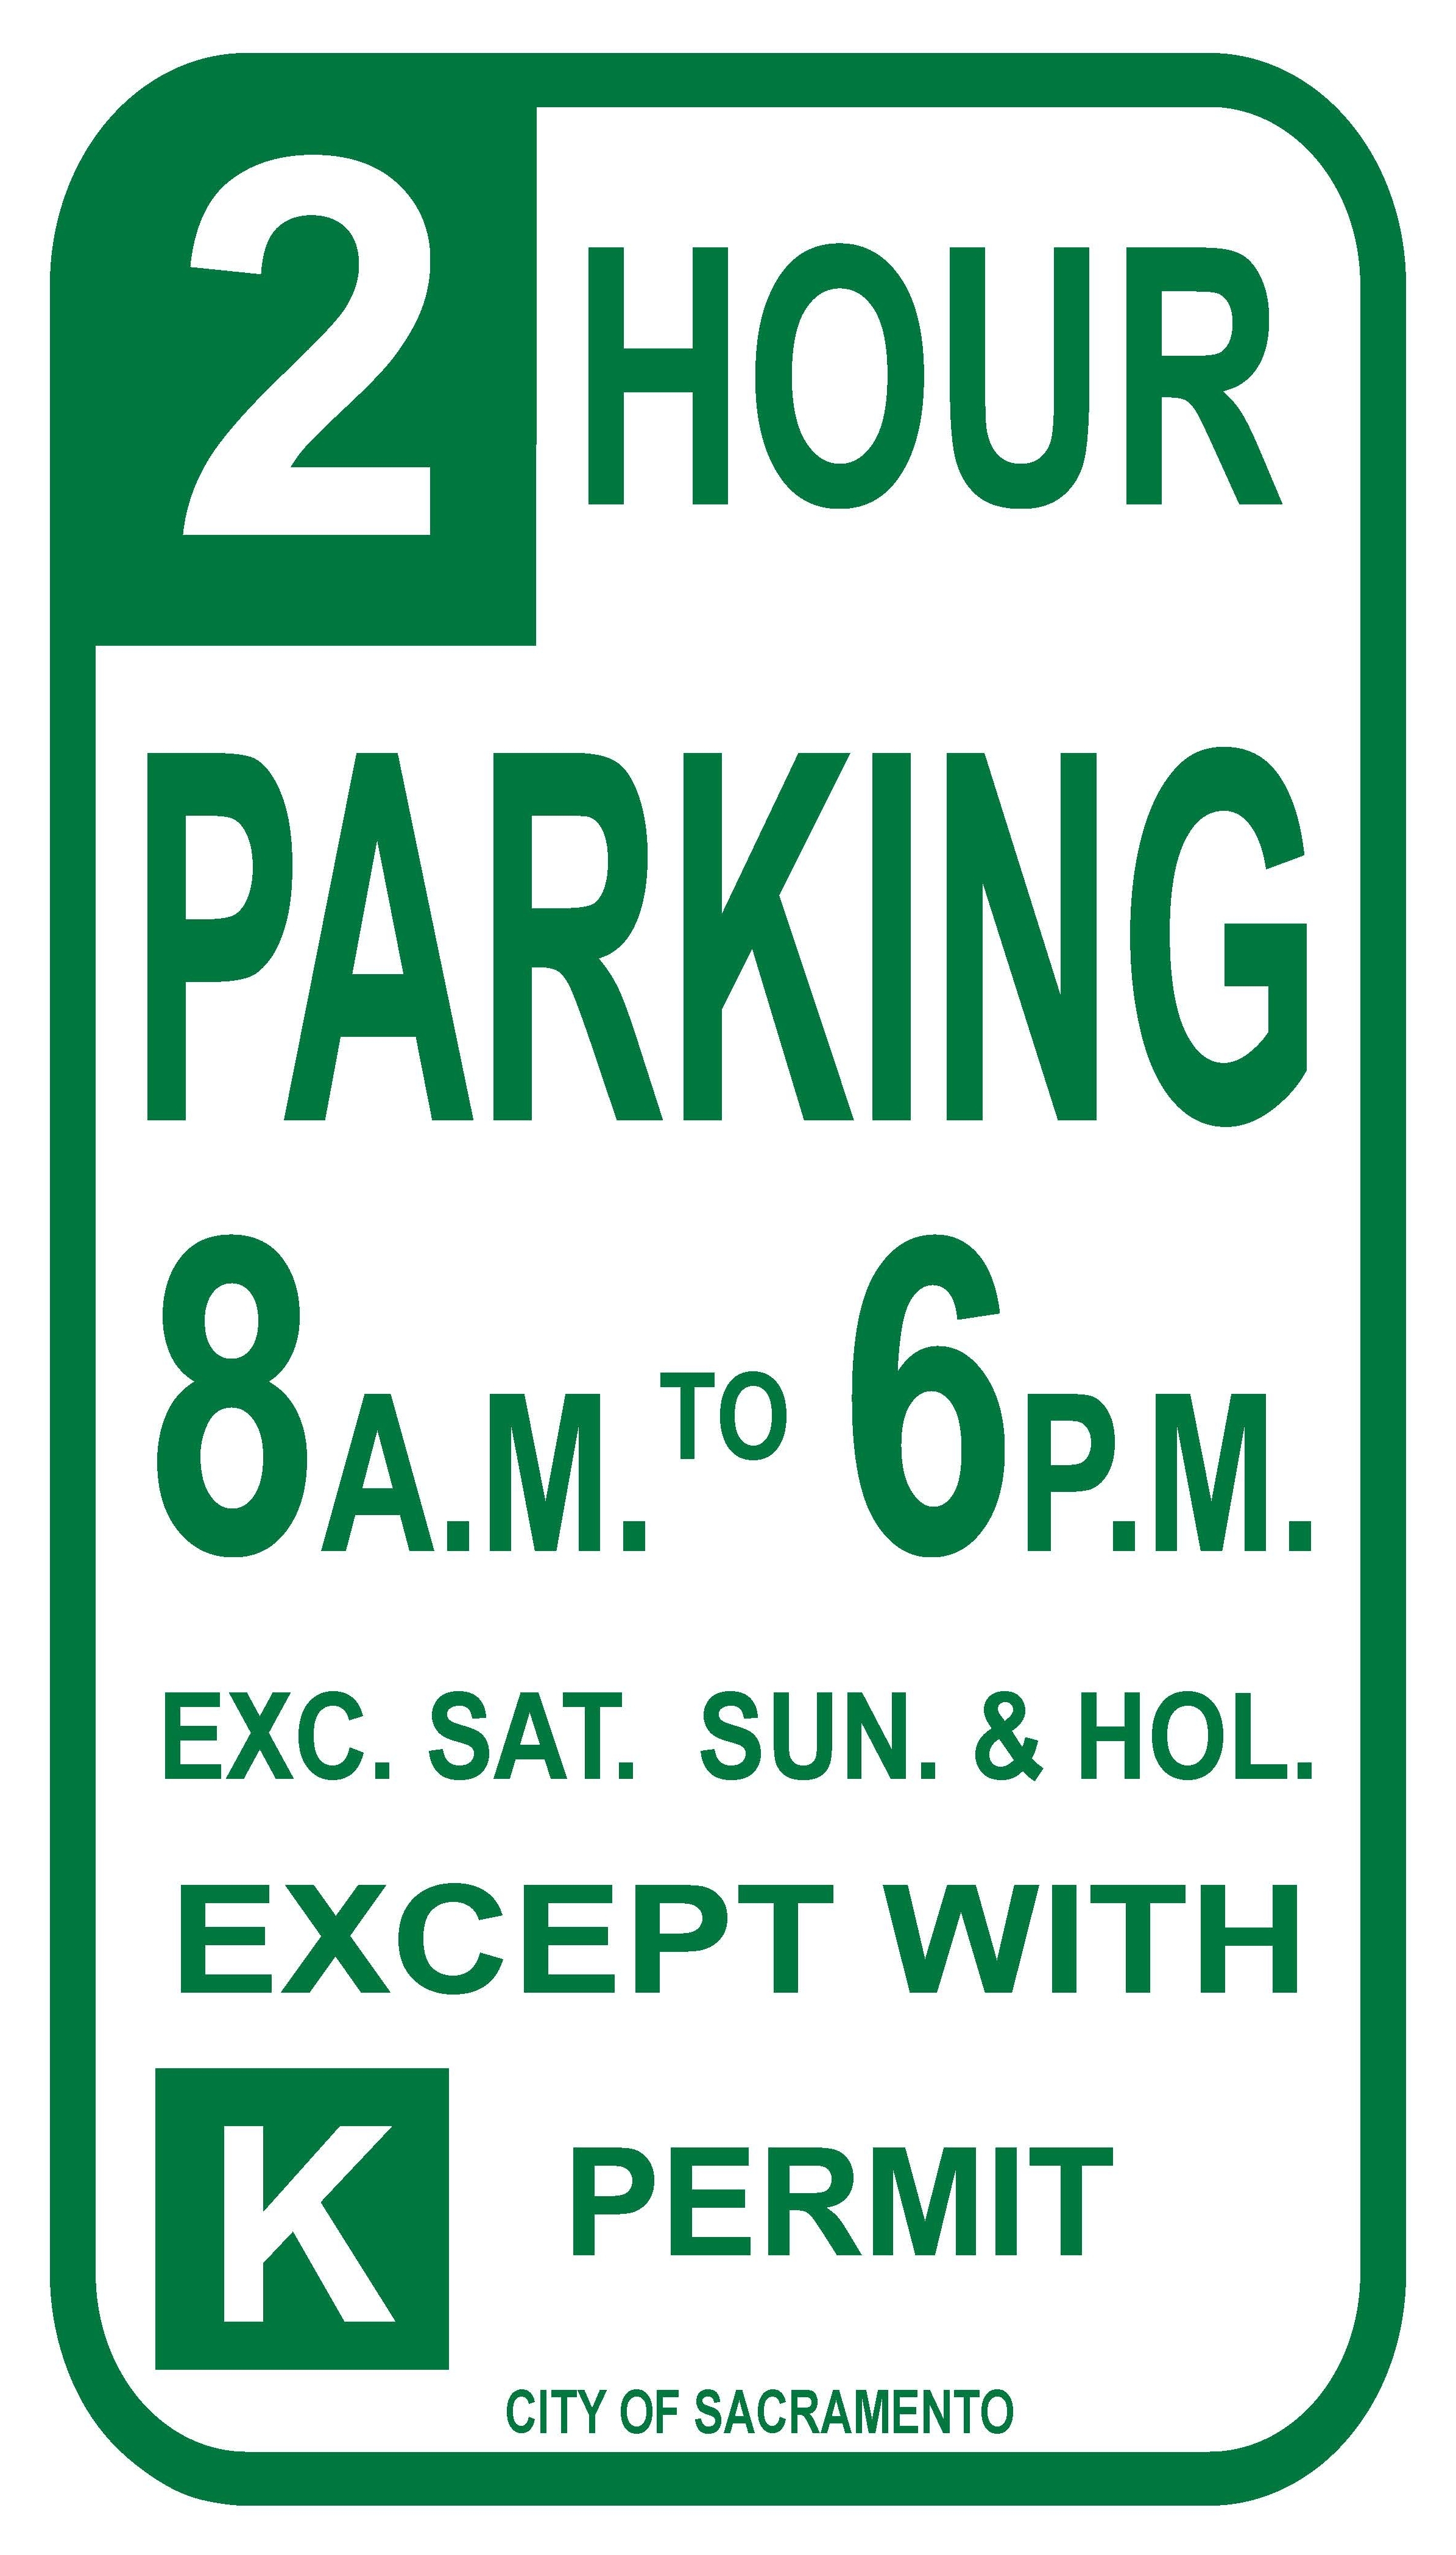 Image of green residential permit parking signage for K permit area